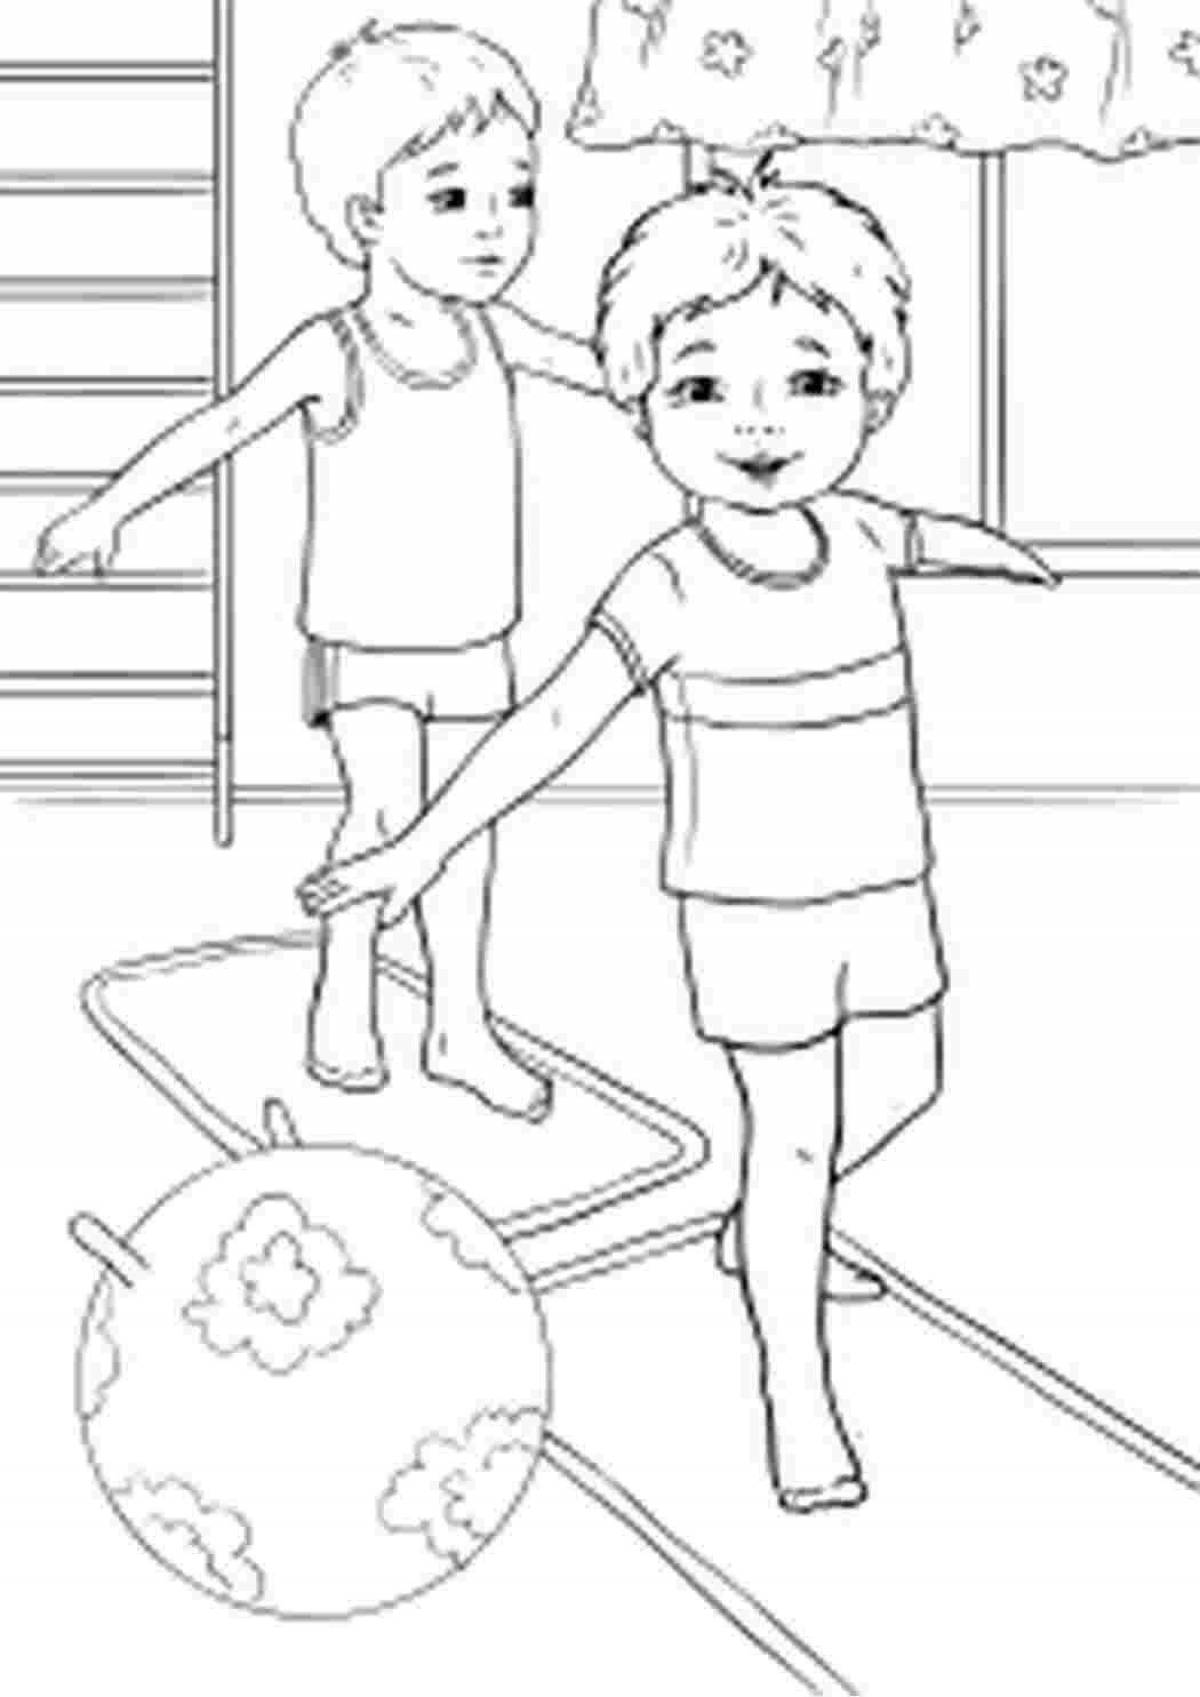 Fun health coloring book for older people